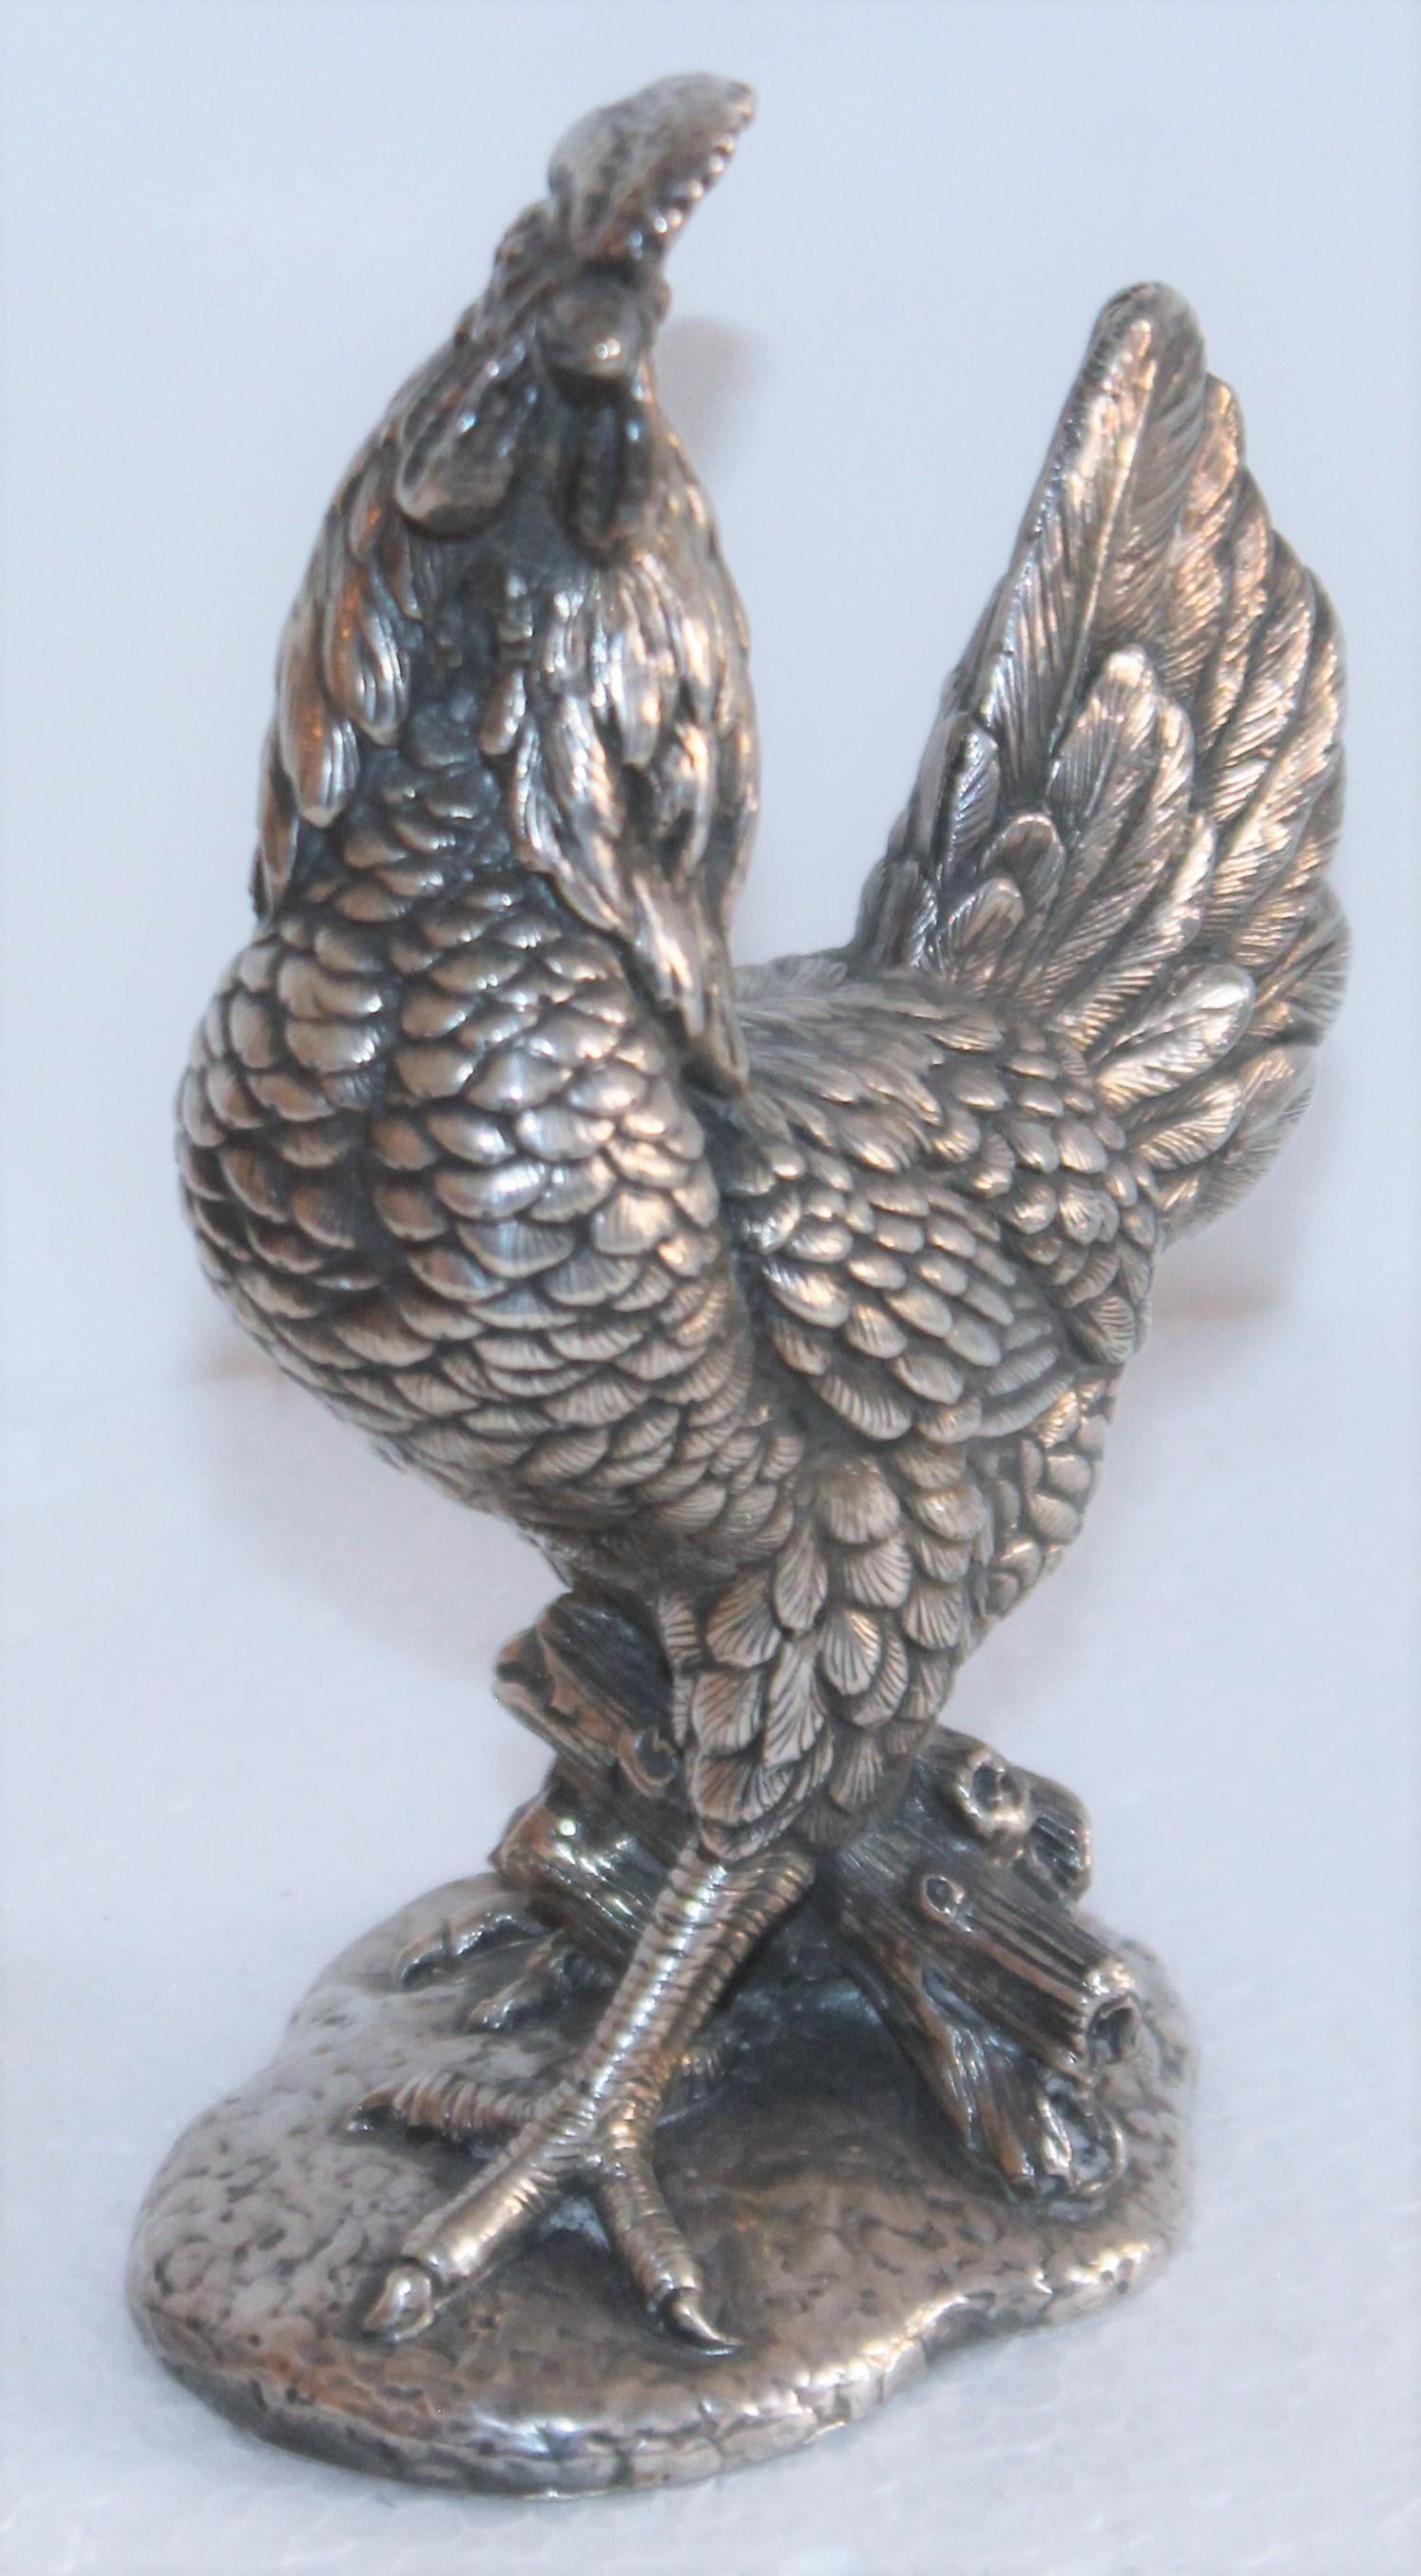 This sterling silver heavy hollow body rooster figure is signed 925 on the base and is in fine condition.